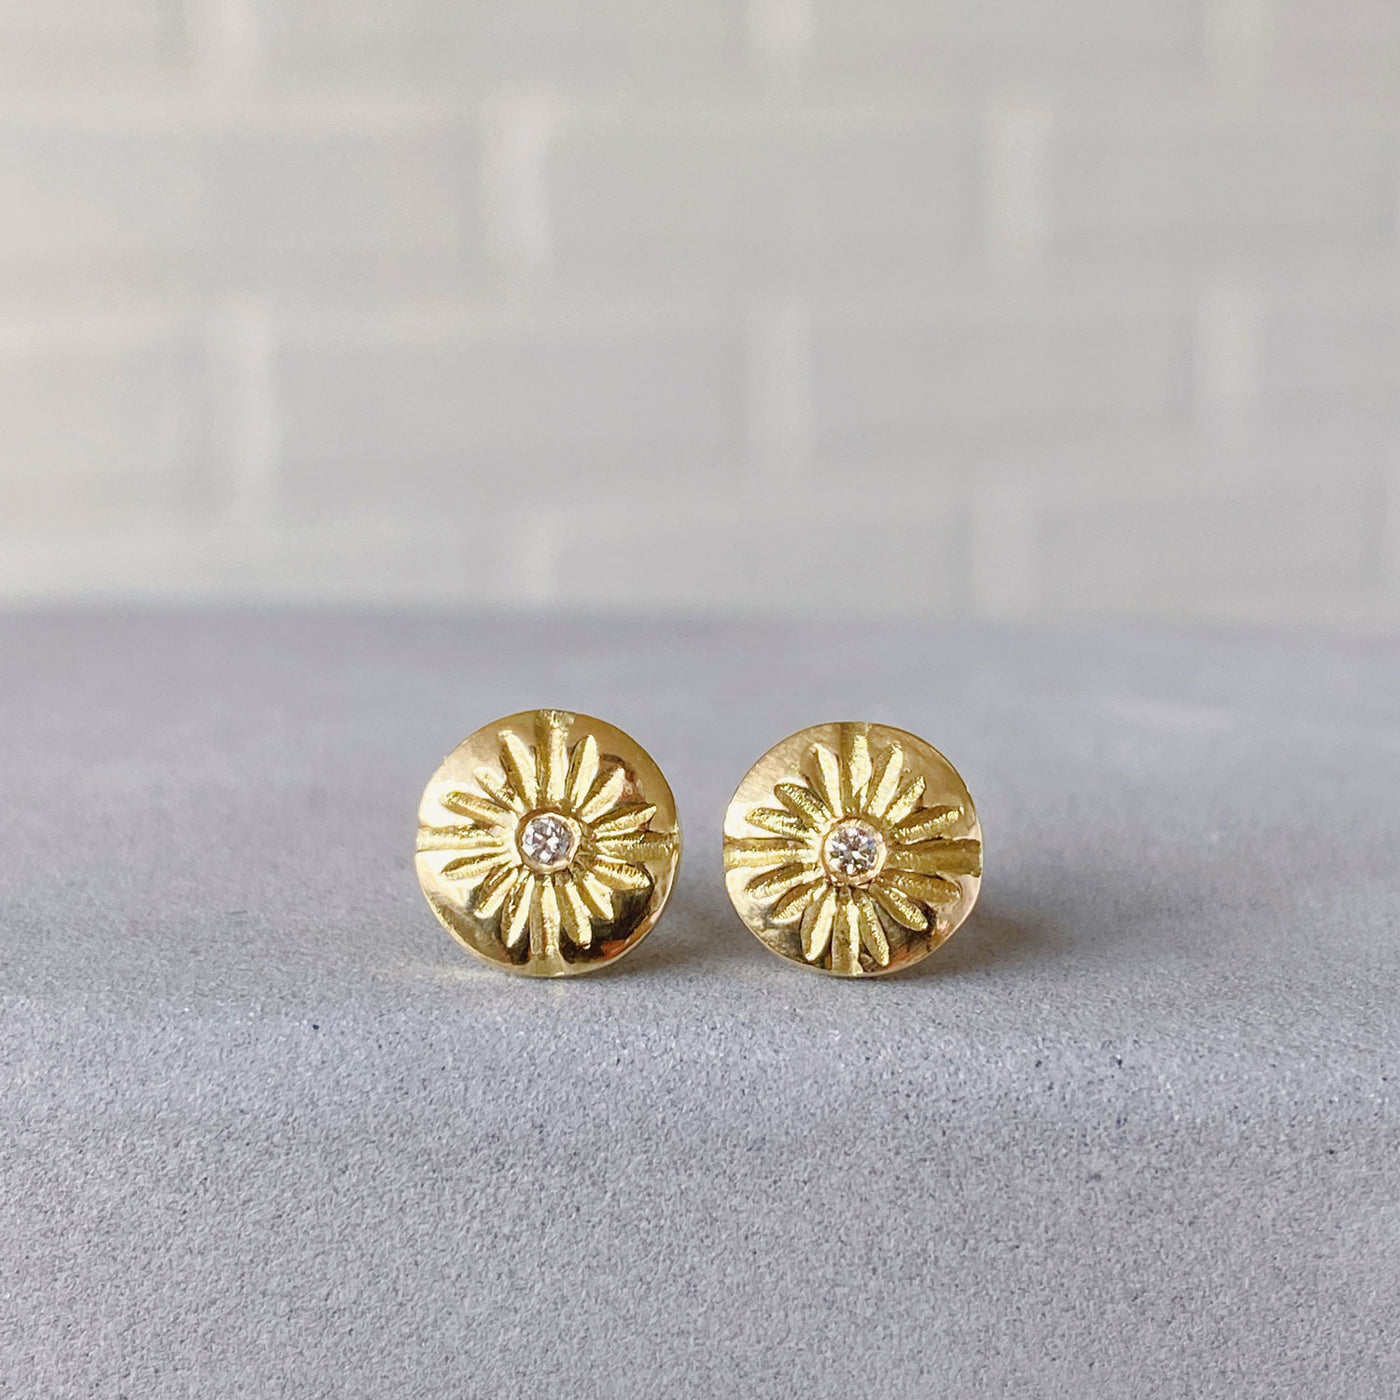 Small round carved sunburst stud earrings with diamond centers in gold in natural light